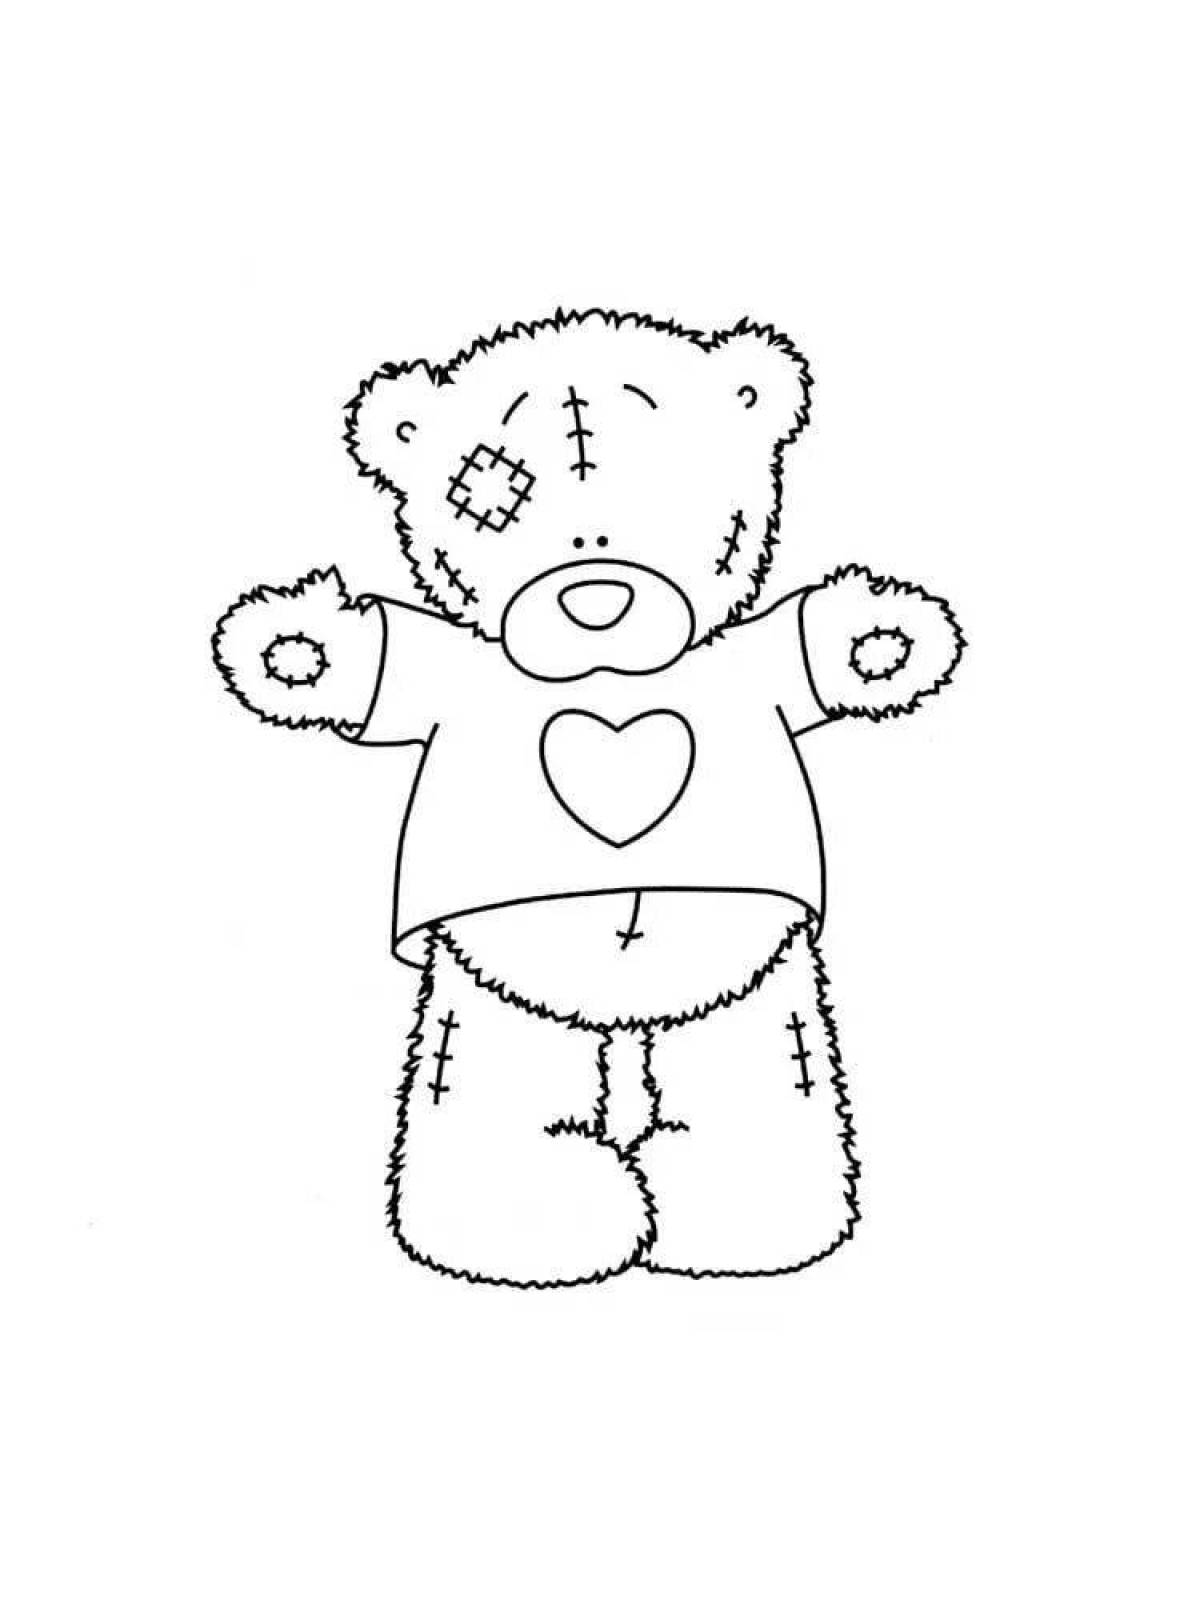 Huggy bear coloring page